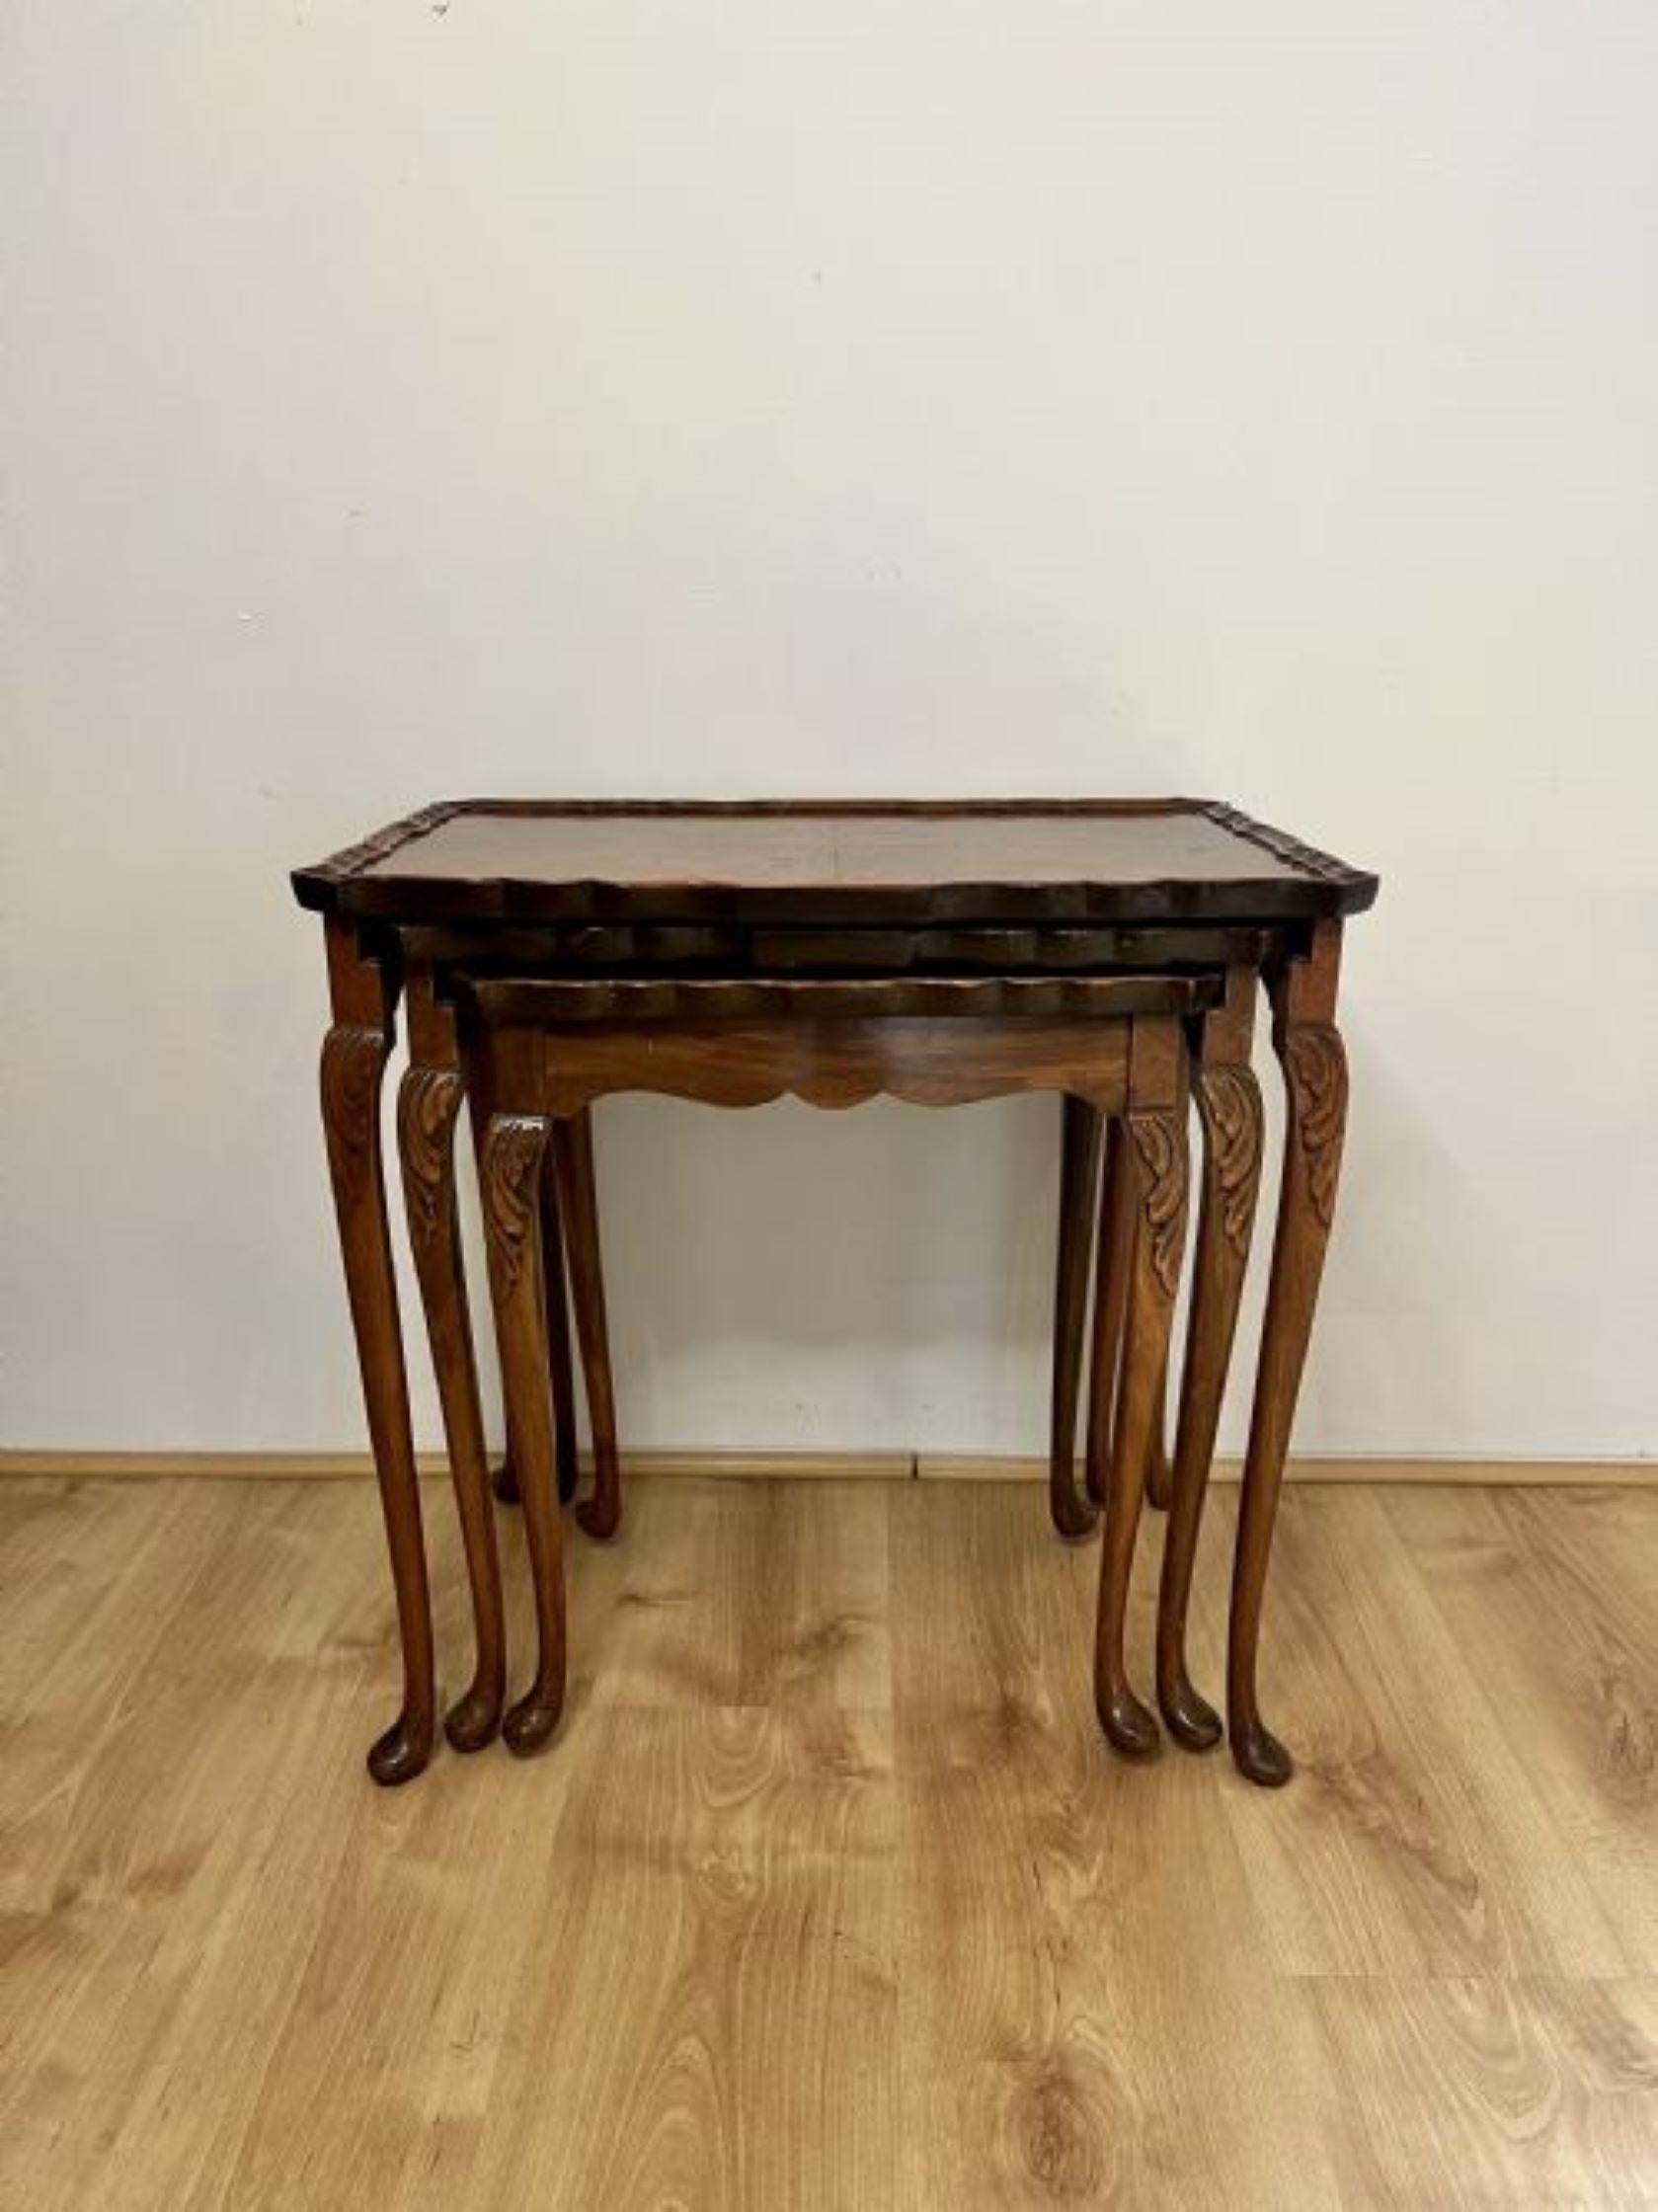 Fantastic quality antique burr walnut nest of tables having quality burr walnut serpentine shaped tops with a carved edge, standing on carved solid walnut shaped cabriole legs with carved scroll feet.